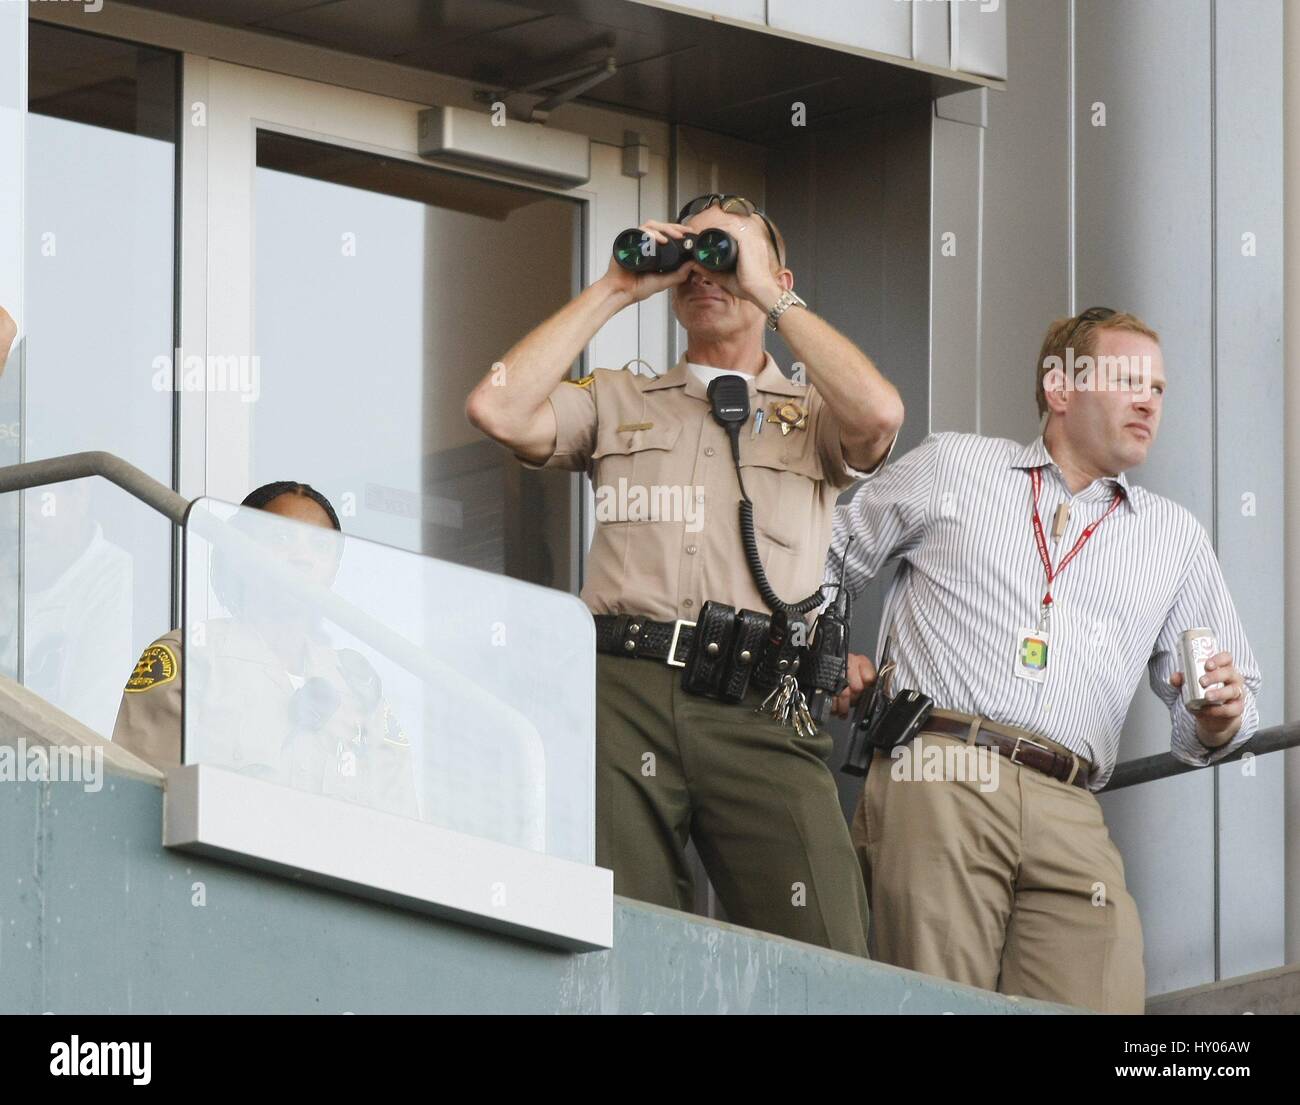 DAVID BECKHAM WATCHED BY SECUR LOS ANGELES GALAXY HOME DEPOT CENTRE CARSON LOS ANGELES USA 21 June 2008 Stock Photo